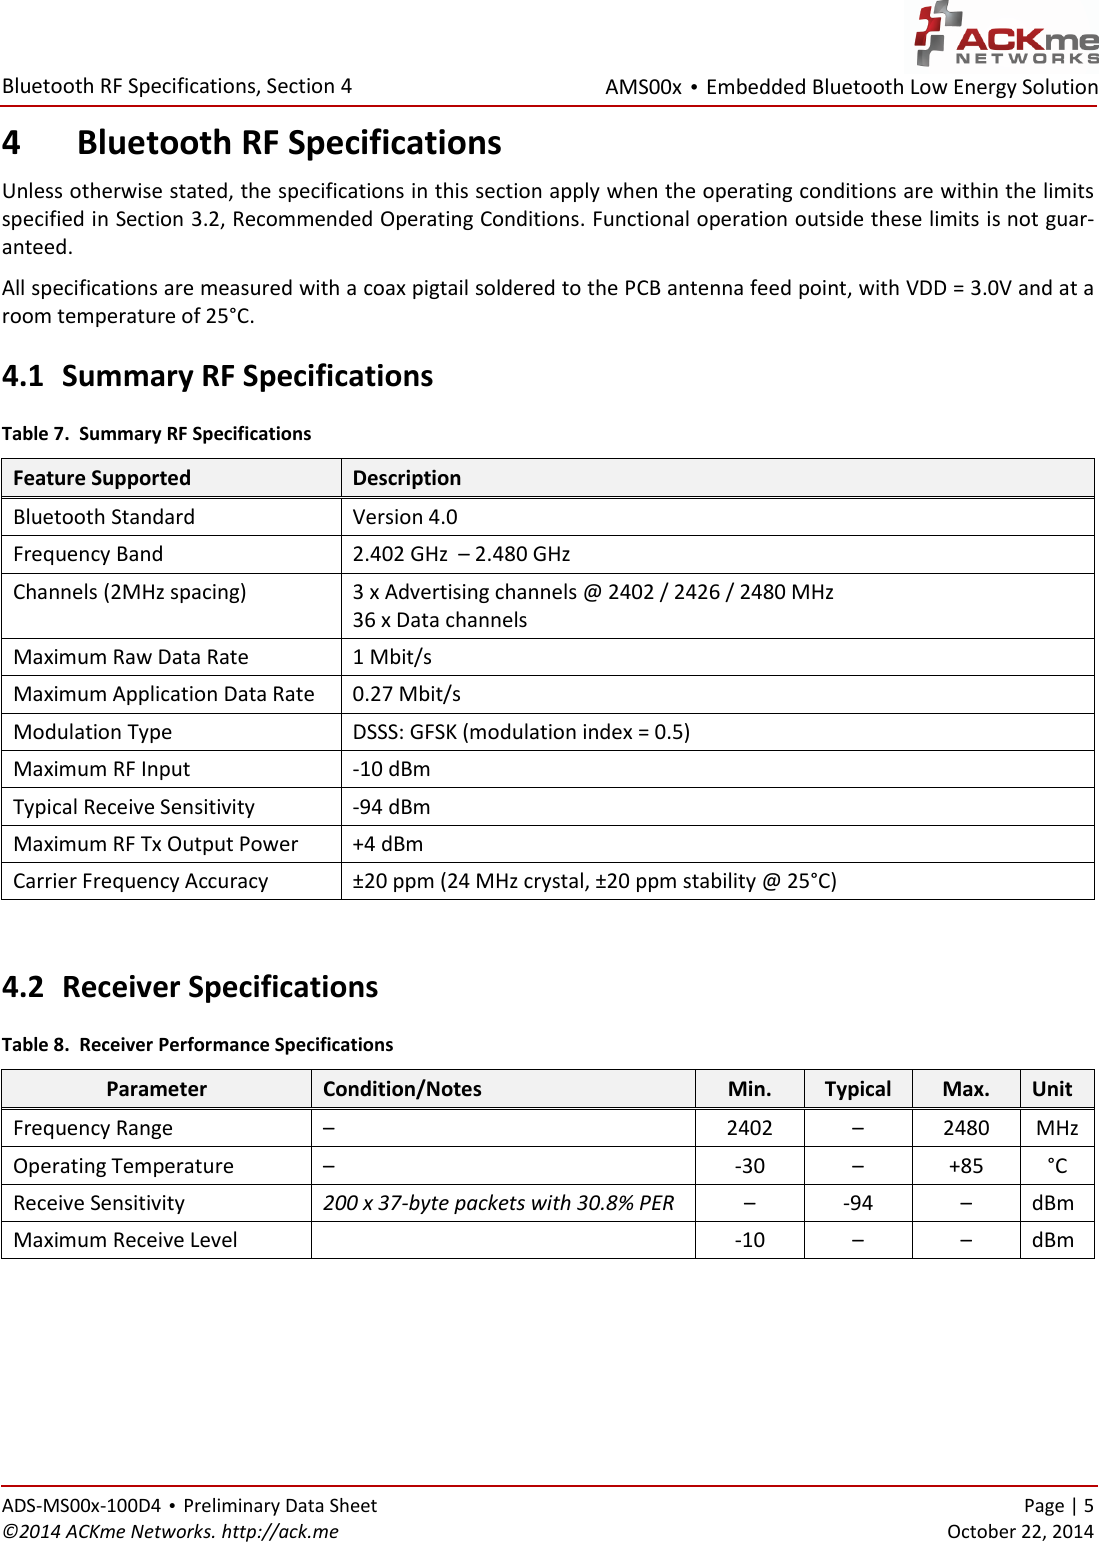 AMS00x • Embedded Bluetooth Low Energy Solution  Bluetooth RF Specifications, Section 4 ADS-MS00x-100D4 • Preliminary Data Sheet    Page | 5 ©2014 ACKme Networks. http://ack.me    October 22, 2014 4 Bluetooth RF Specifications Unless otherwise stated, the specifications in this section apply when the operating conditions are within the limits specified in Section 3.2, Recommended Operating Conditions. Functional operation outside these limits is not guar-anteed. All specifications are measured with a coax pigtail soldered to the PCB antenna feed point, with VDD = 3.0V and at a room temperature of 25°C.  4.1 Summary RF Specifications Table 7.  Summary RF Specifications Feature Supported Description Bluetooth Standard Version 4.0 Frequency Band 2.402 GHz  – 2.480 GHz Channels (2MHz spacing) 3 x Advertising channels @ 2402 / 2426 / 2480 MHz 36 x Data channels Maximum Raw Data Rate 1 Mbit/s Maximum Application Data Rate 0.27 Mbit/s Modulation Type DSSS: GFSK (modulation index = 0.5) Maximum RF Input -10 dBm Typical Receive Sensitivity -94 dBm Maximum RF Tx Output Power +4 dBm Carrier Frequency Accuracy ±20 ppm (24 MHz crystal, ±20 ppm stability @ 25°C)  4.2 Receiver Specifications Table 8.  Receiver Performance Specifications Parameter Condition/Notes Min. Typical Max. Unit Frequency Range –  2402 – 2480 MHz Operating Temperature – -30 – +85 °C Receive Sensitivity 200 x 37-byte packets with 30.8% PER – -94 – dBm Maximum Receive Level  -10 – – dBm    